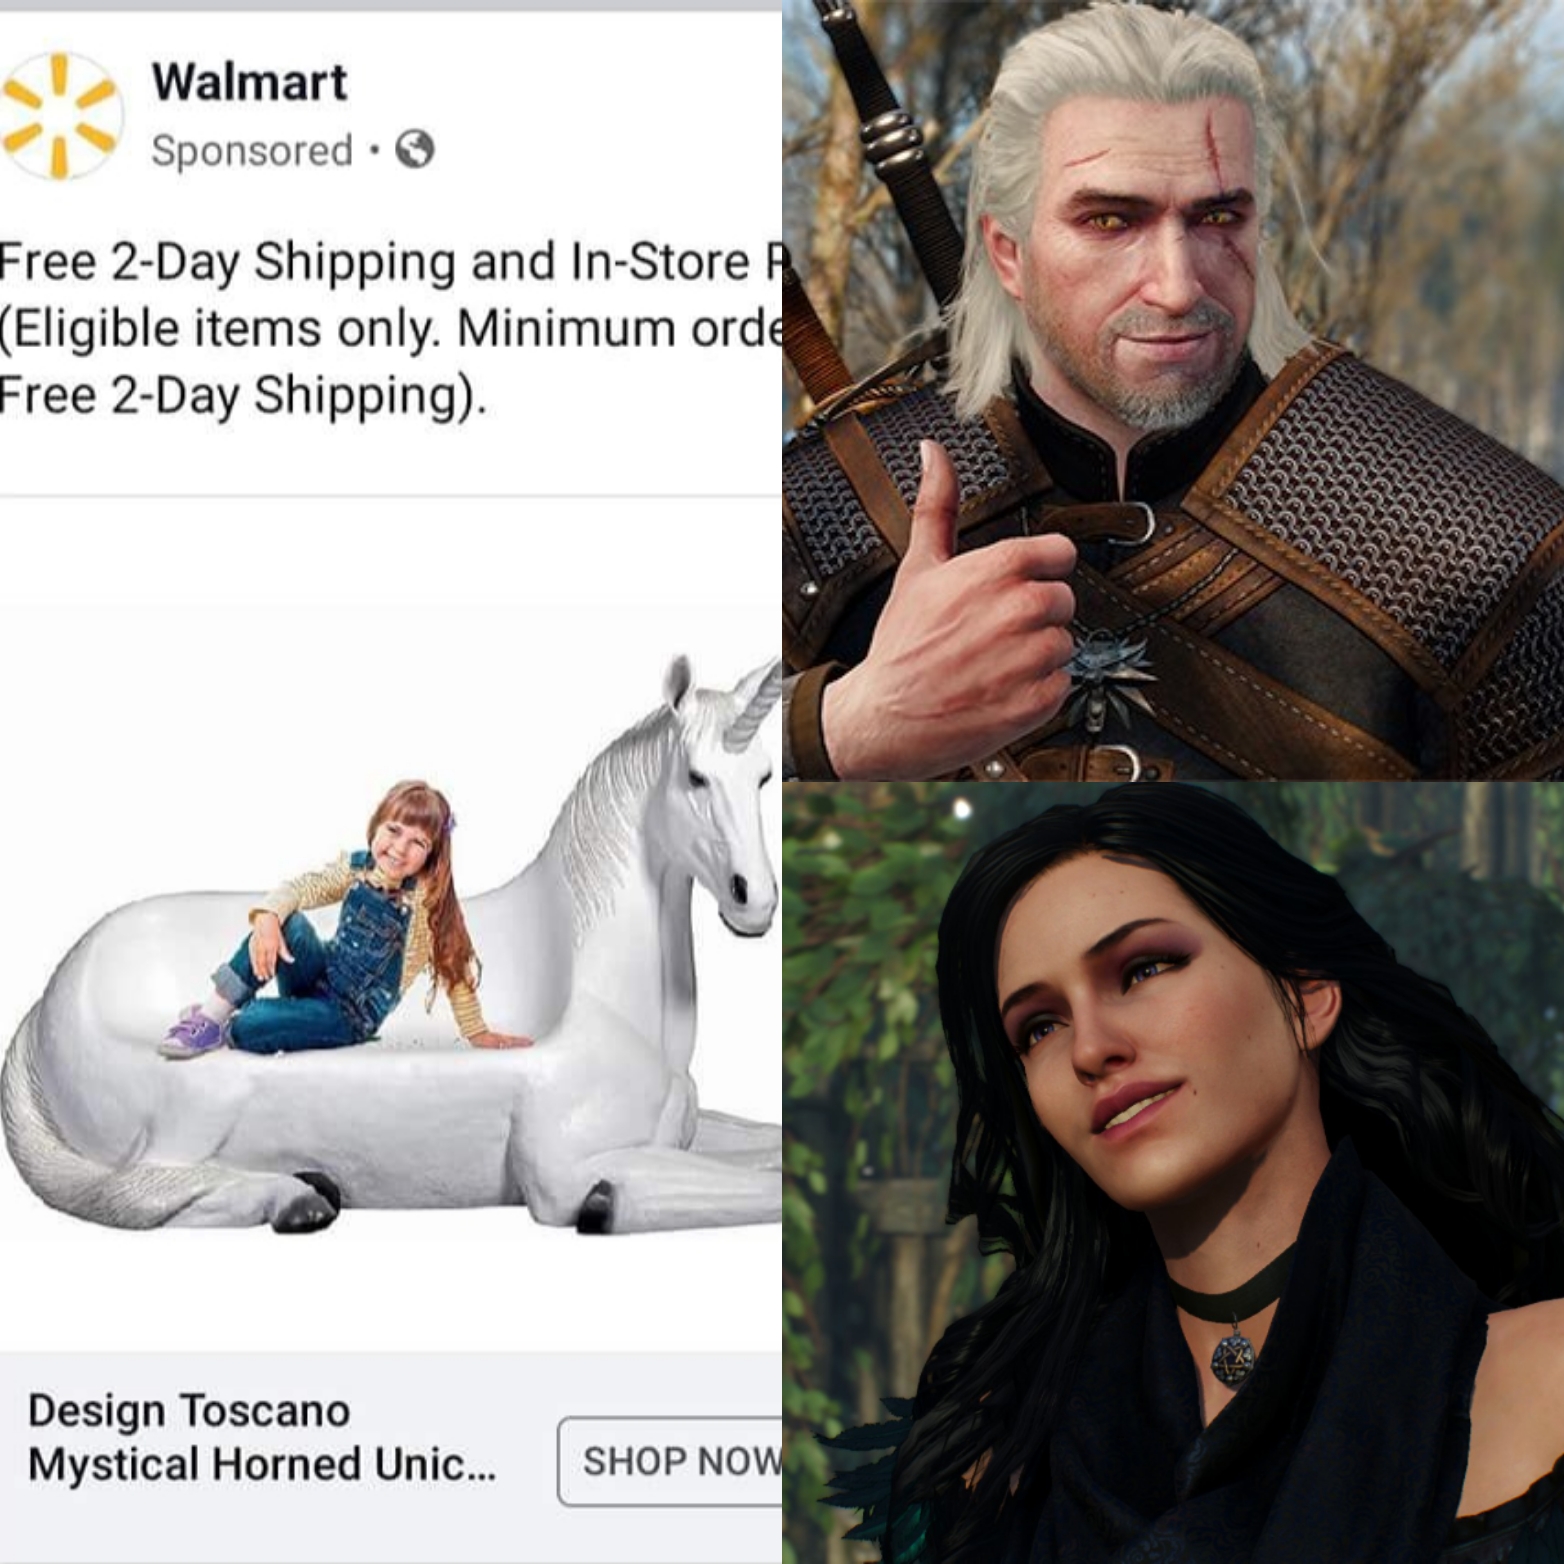 geralt of rivia meme - Walmart Sponsored Free 2Day Shipping and InStore Eligible items only. Minimum orde Free 2Day Shipping. Design Toscano Mystical Horned Unic... Shop Now